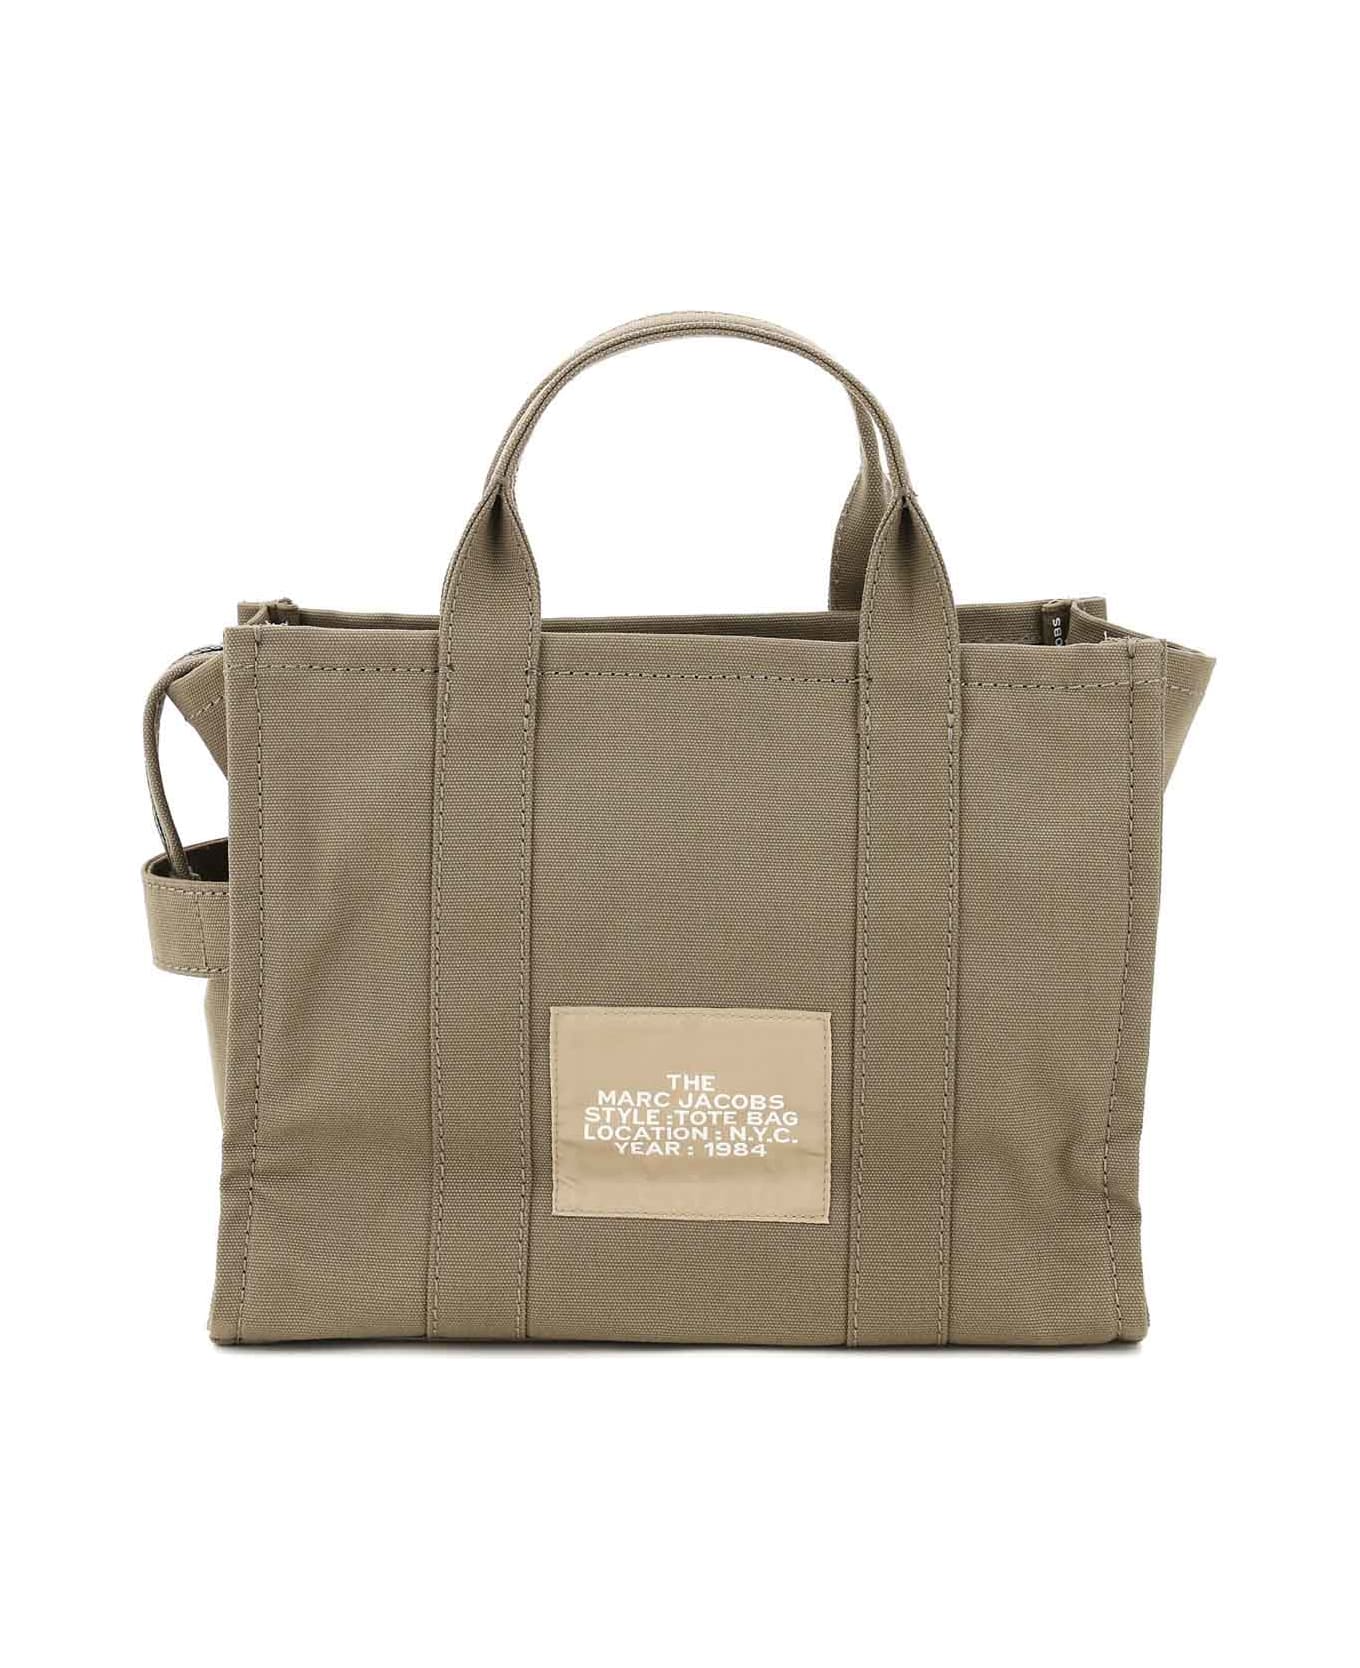 Marc Jacobs The Small Traveler Tote Bag - BEIGE